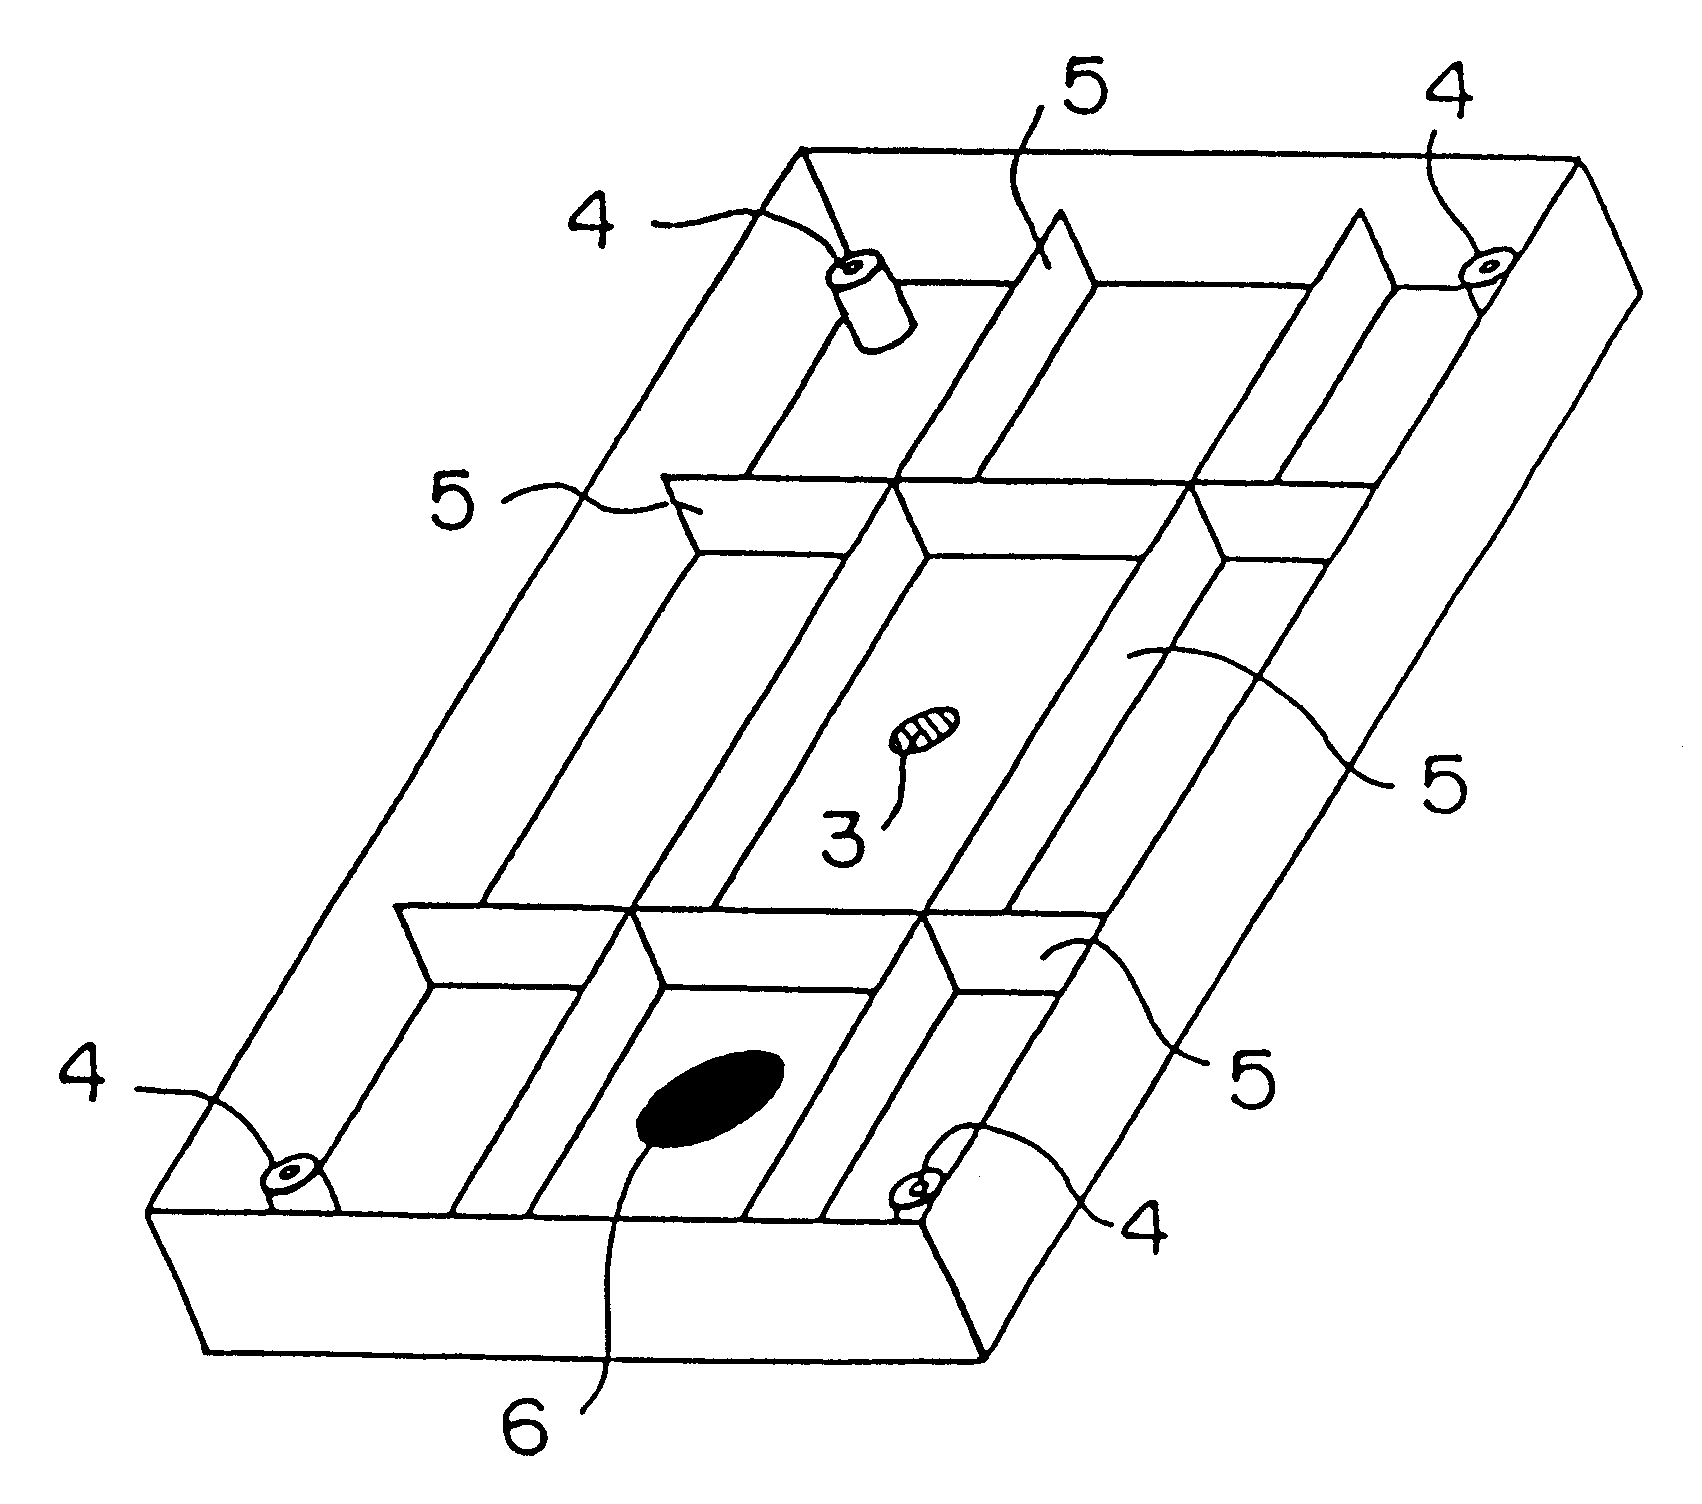 Process of injection molding a foamable plastic composition